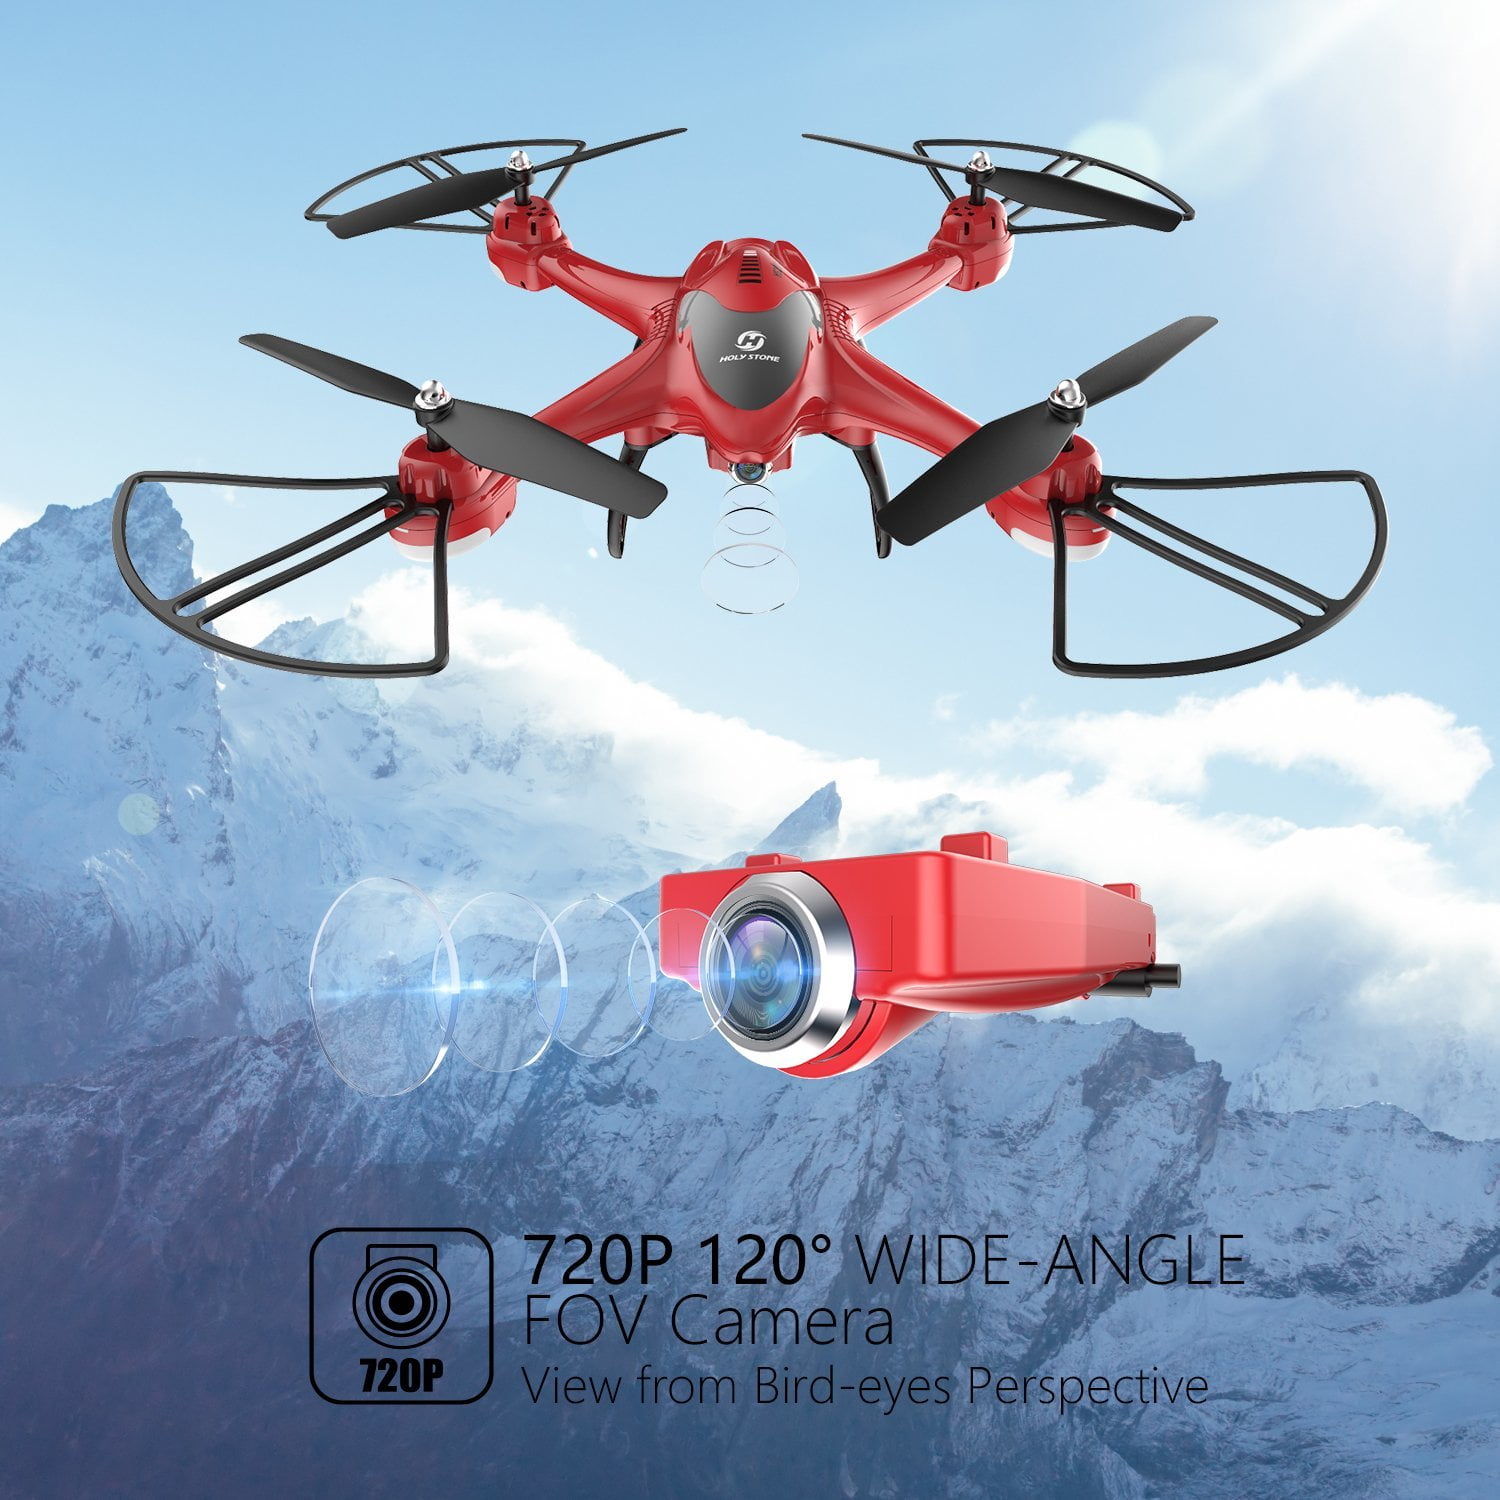 WiFi APP Control Altitude Hold Headless Mode 3D Flips Holy Stone HS220 FPV RC Quadcopter Drone with Camera Live Video One Key Take Off/Landing Foldable Arms,Wing and Folding Flight Modes 